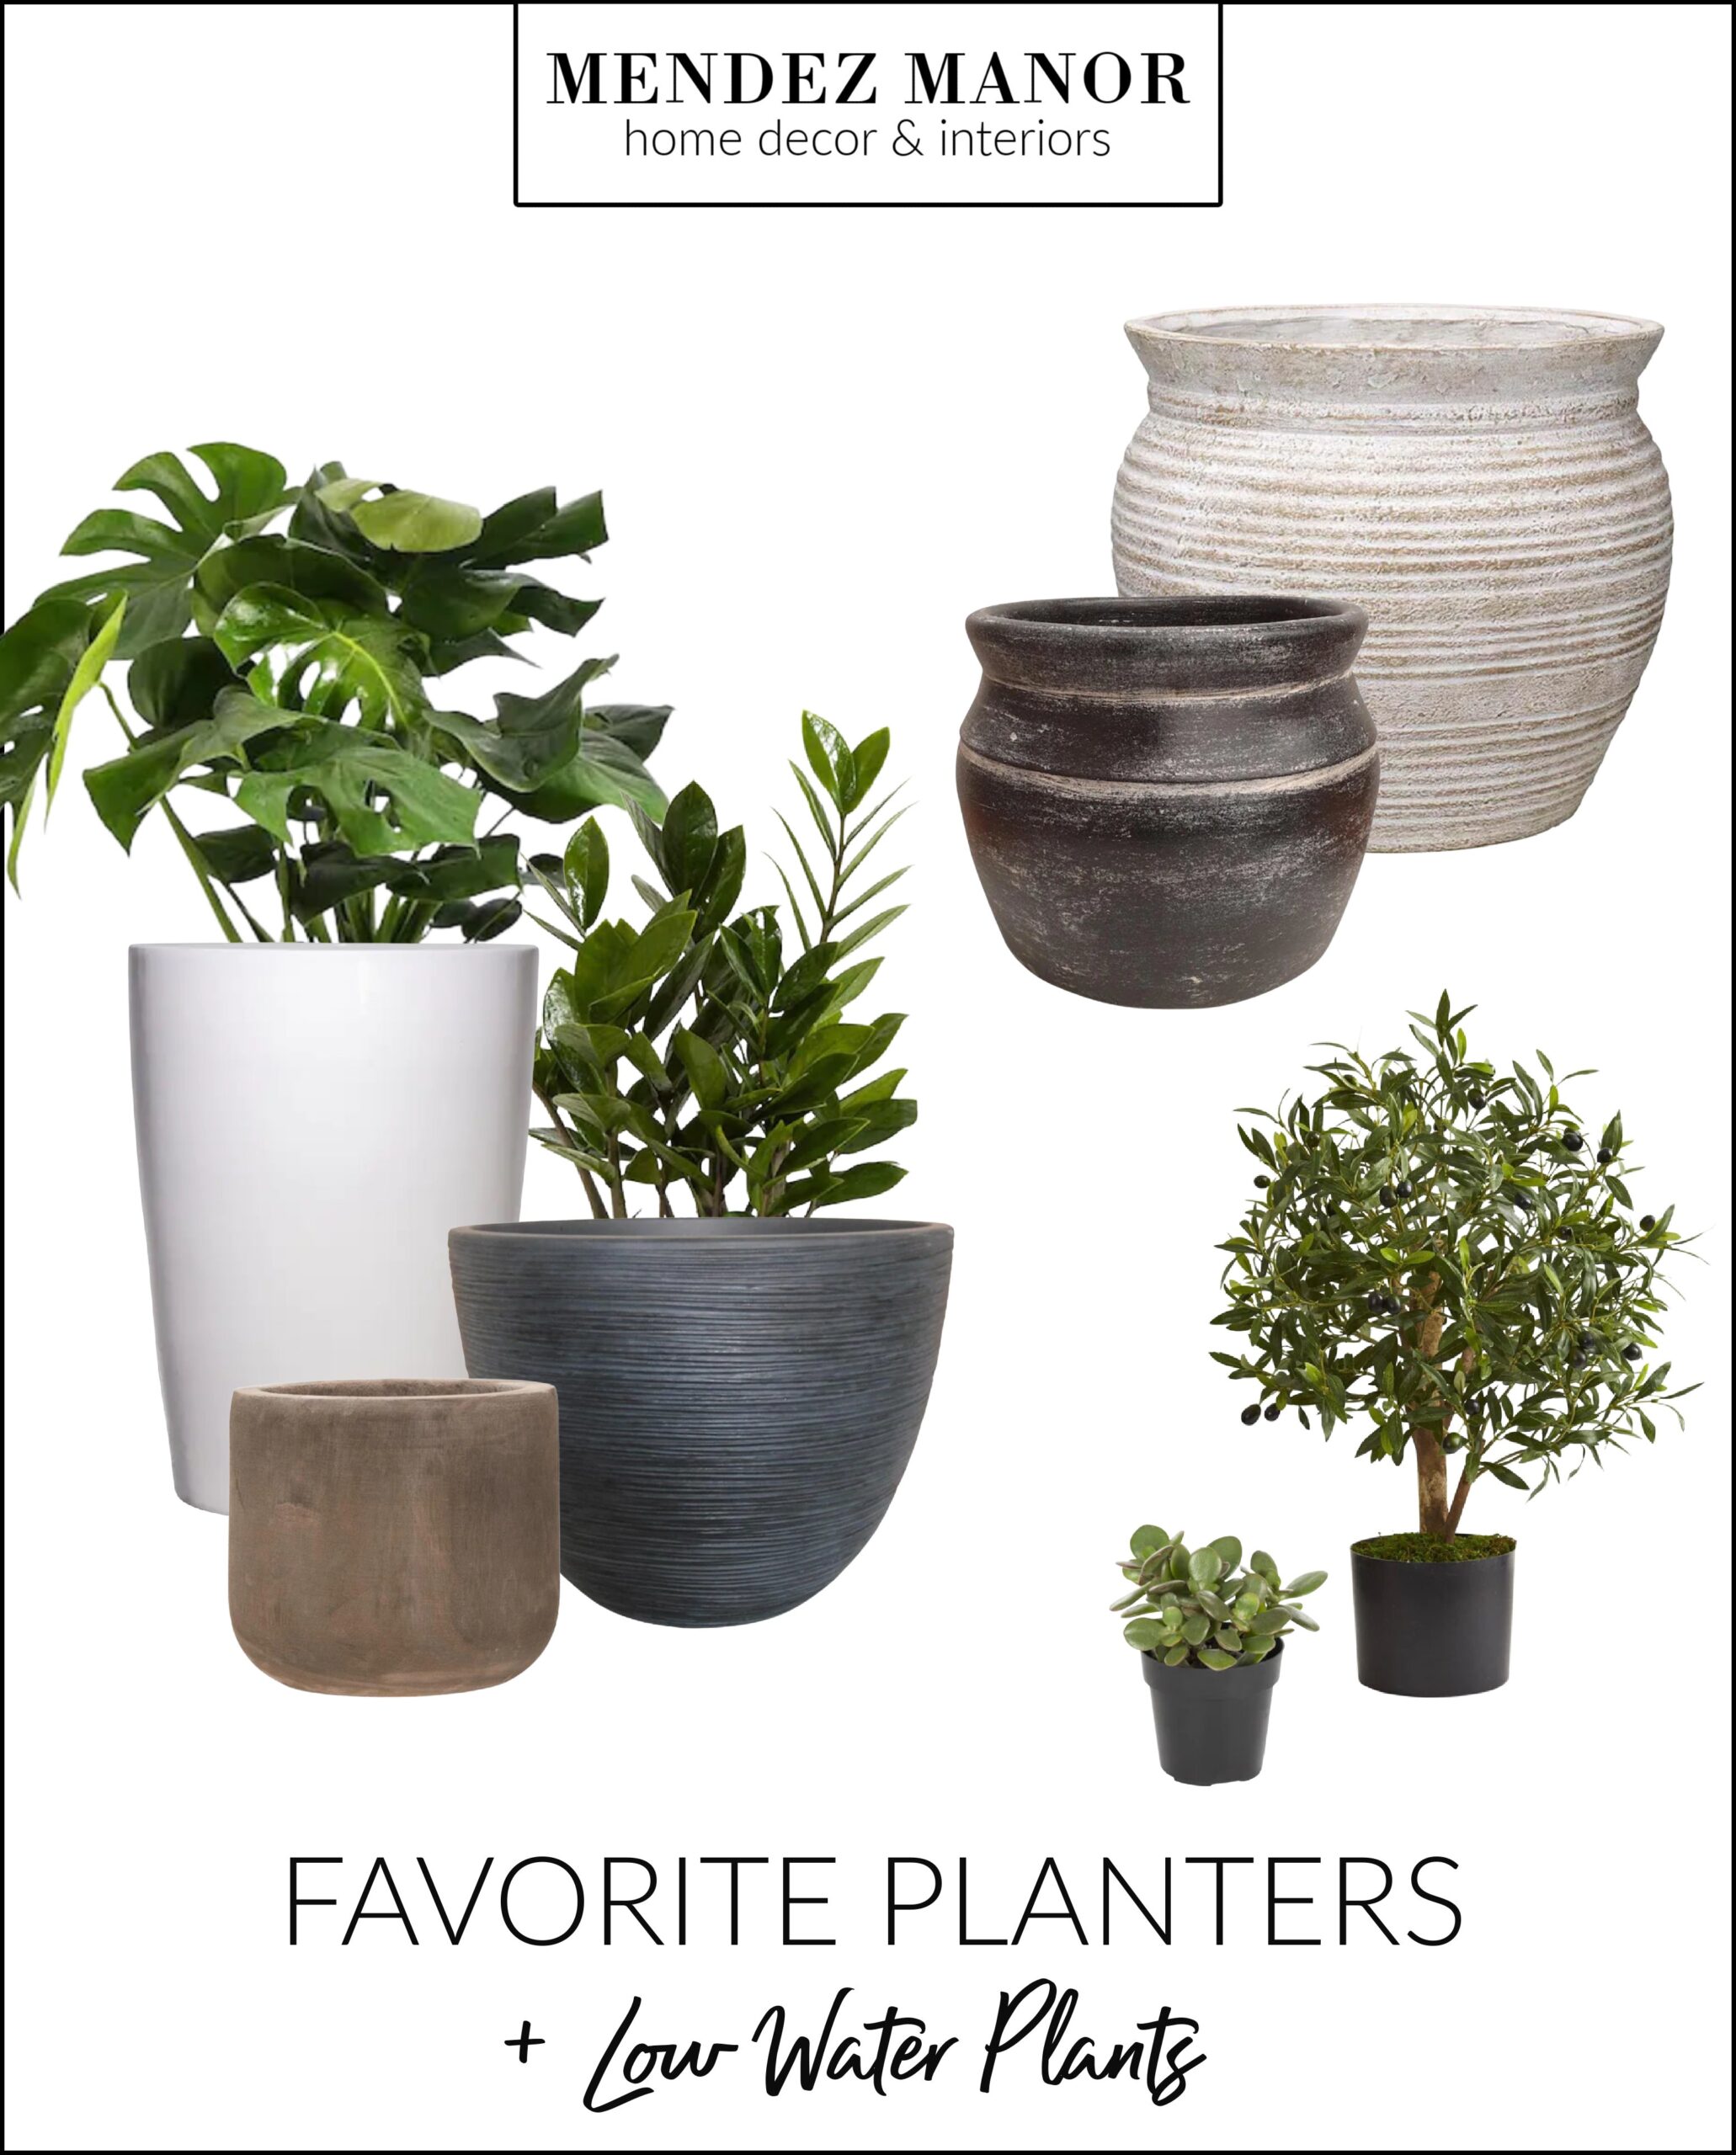 Our Favorite Planters & Low Water Plants